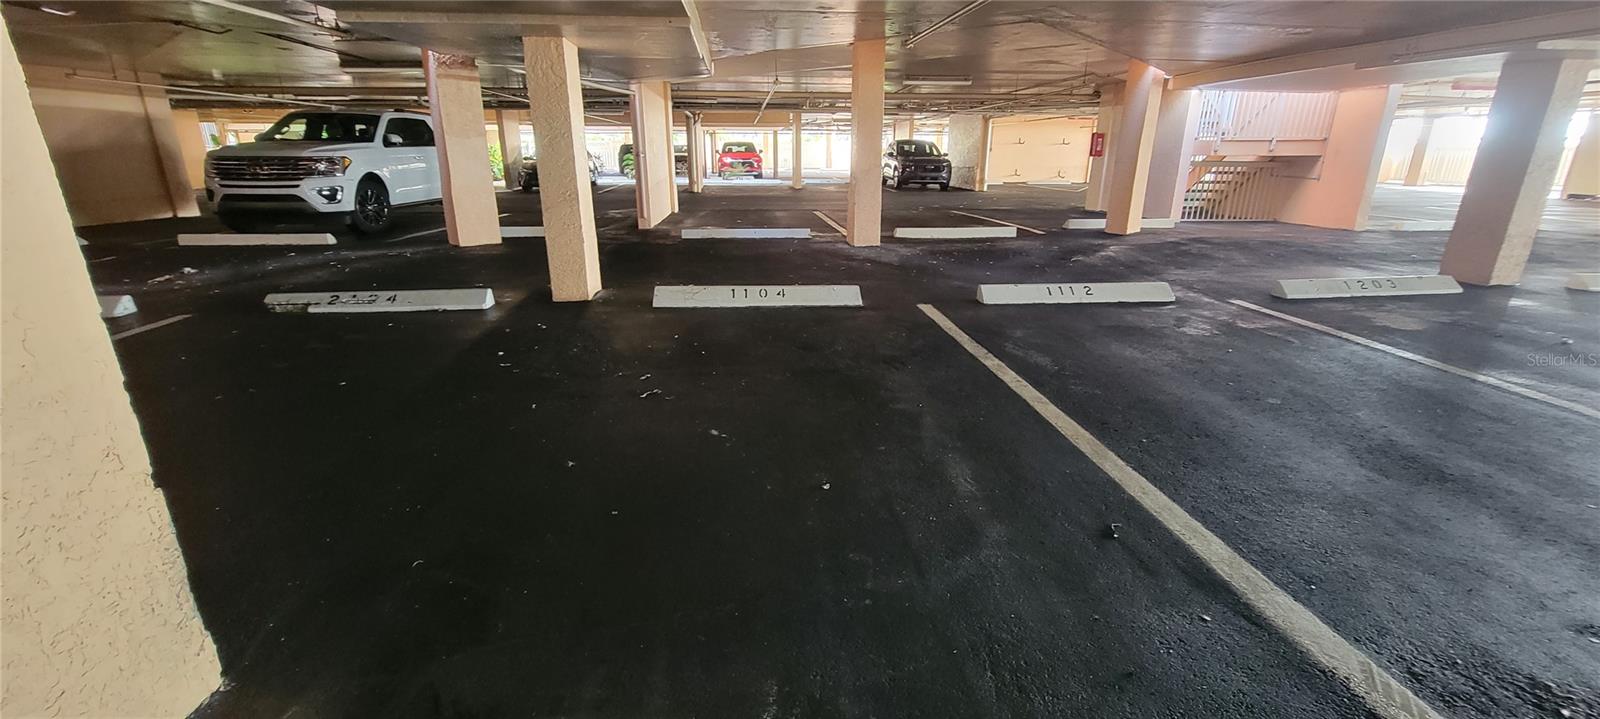 Owners have one assigned parking space in the under-building garage